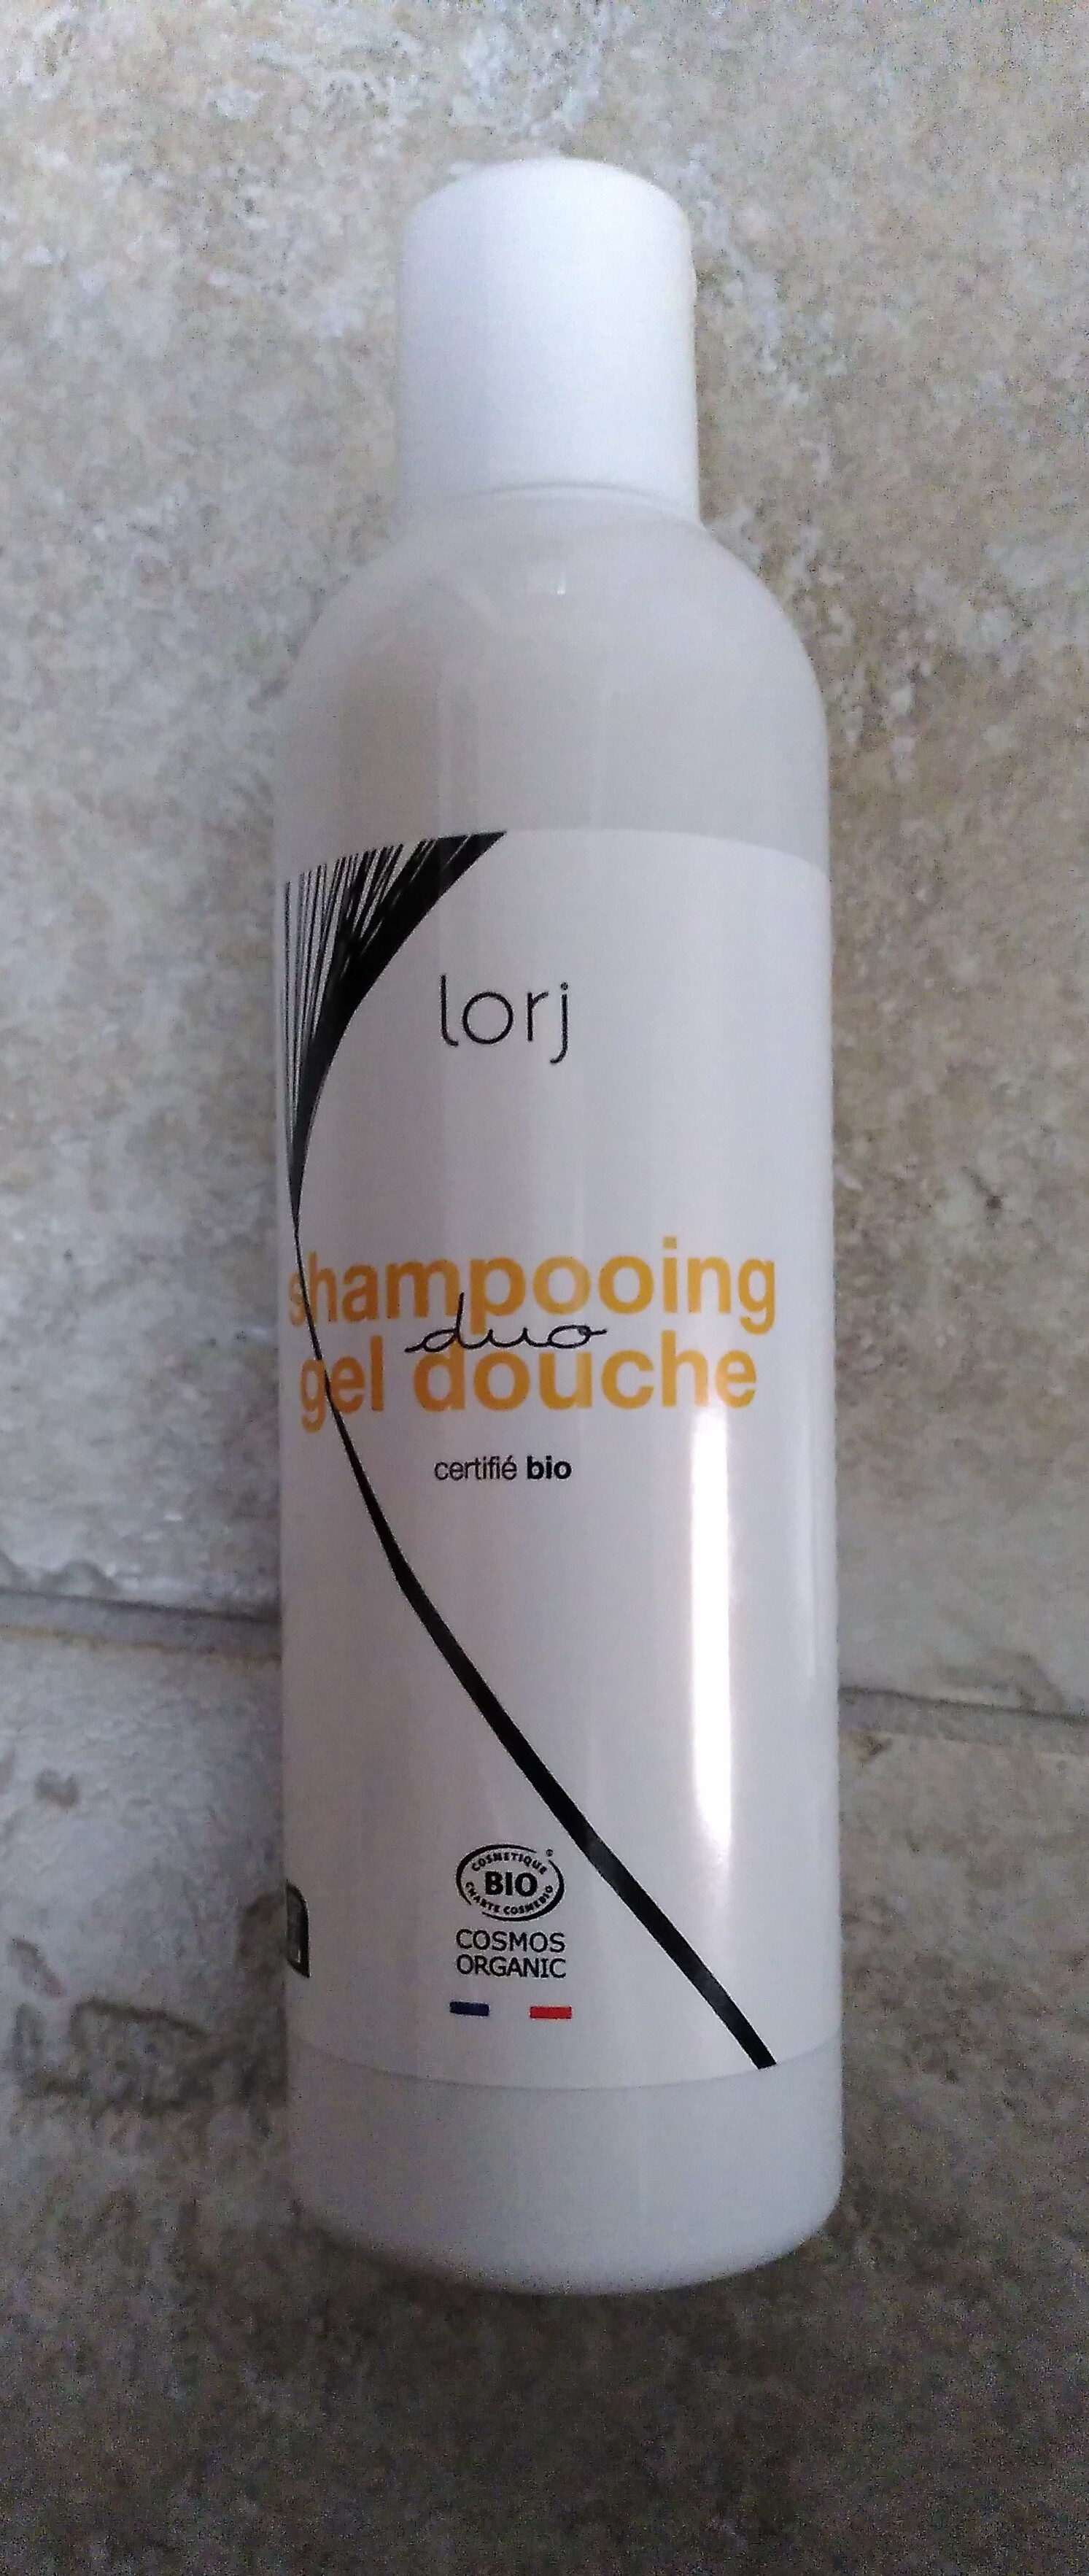 Duo shampoing gel douche - Tuote - fr